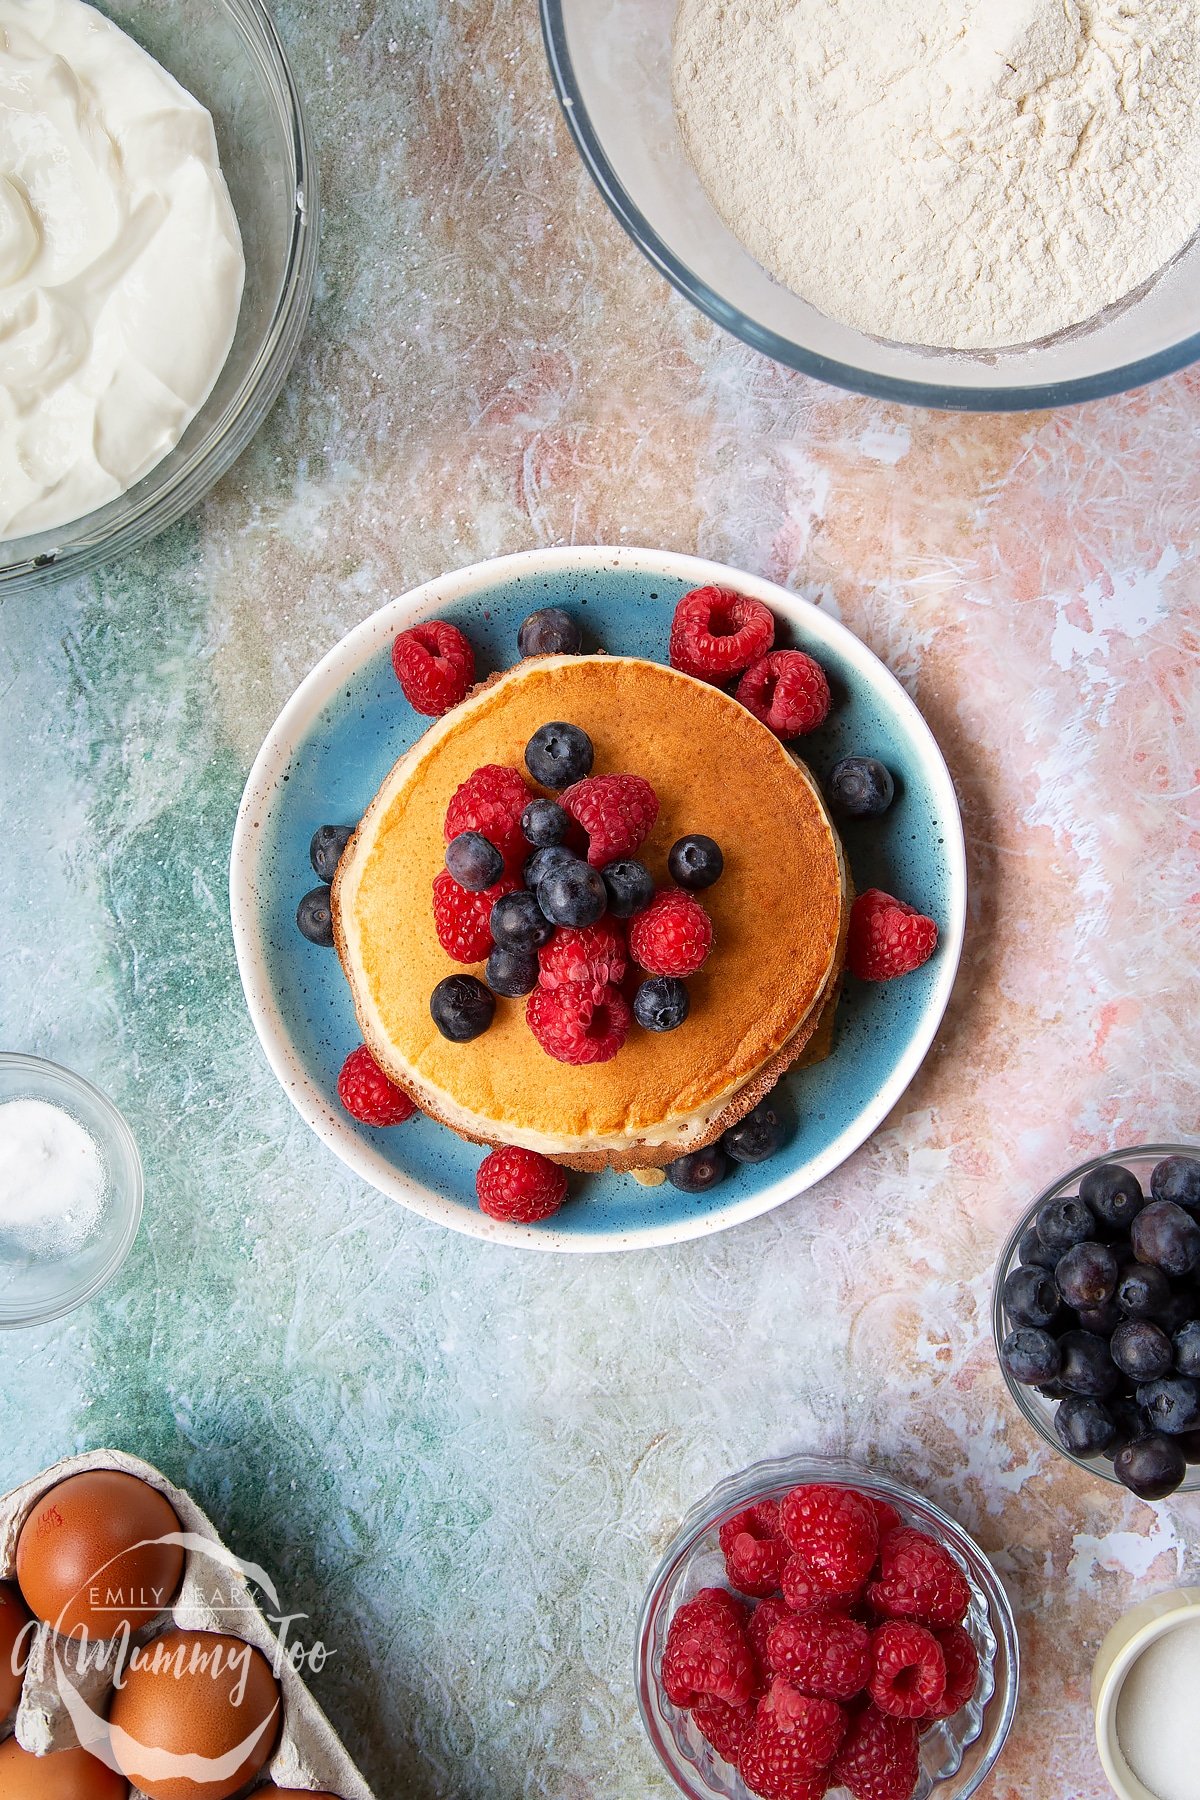 Skyr pancakes piled on a blue plate with blueberries and raspberries on top. Berries and ingredients to make skyr pancakes surround the pan.